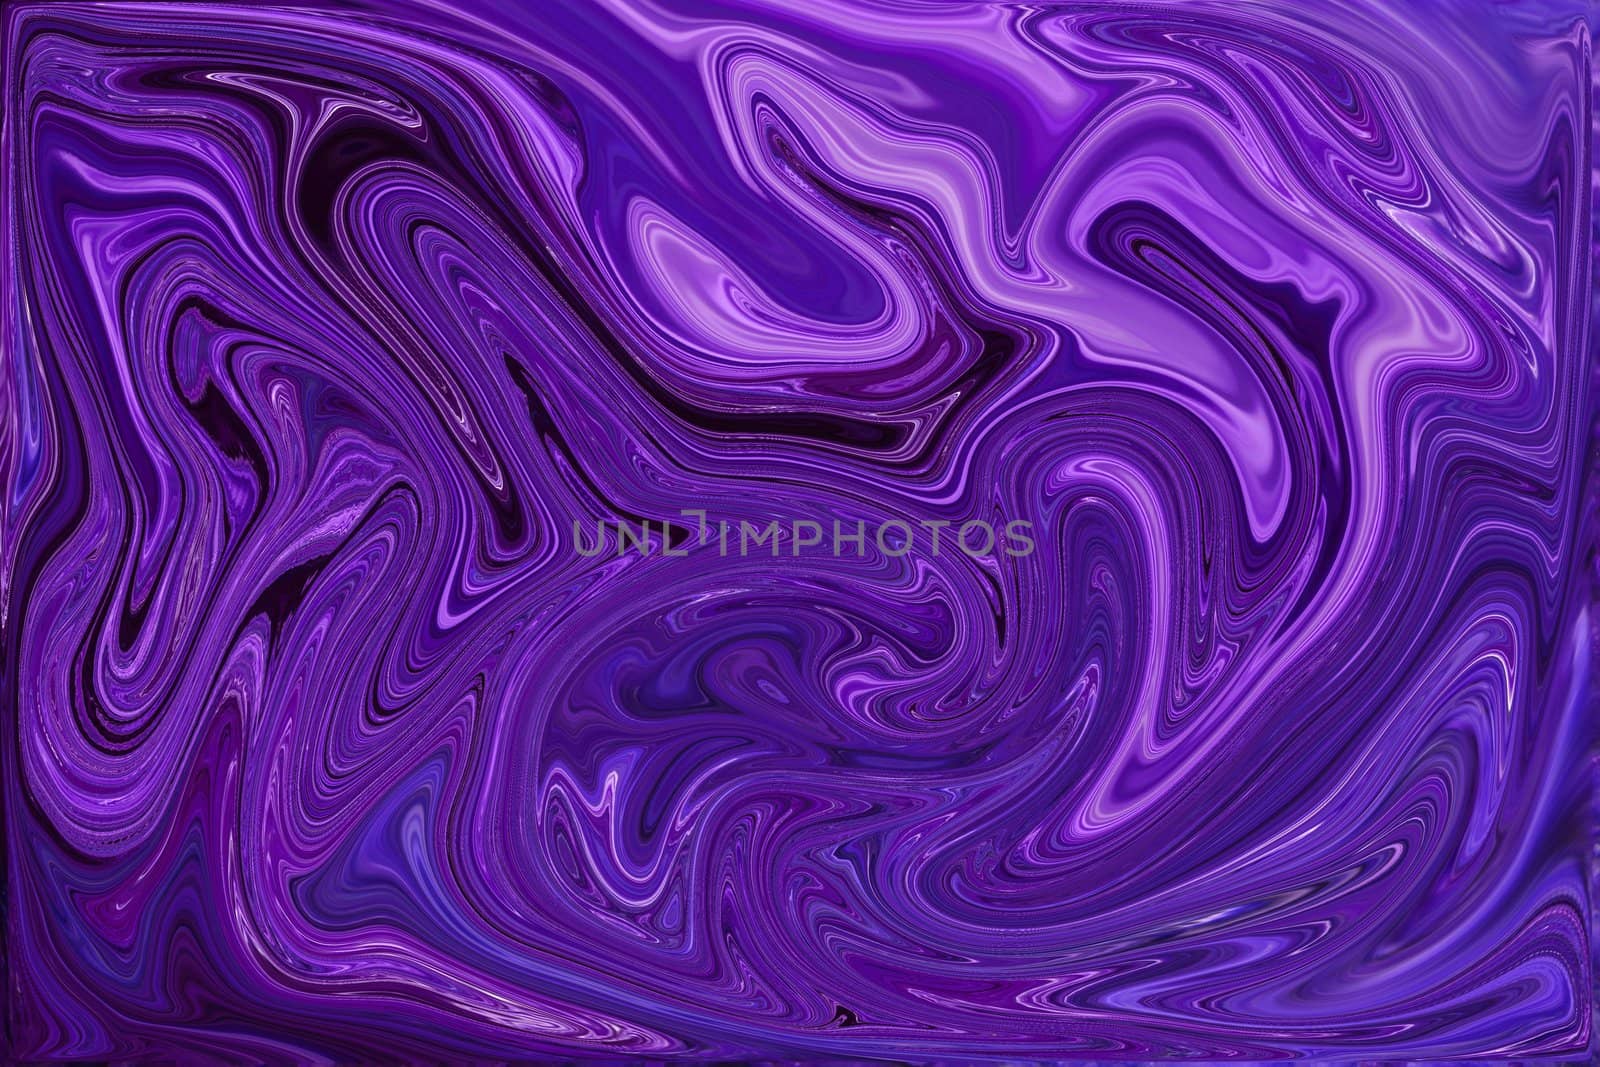 An illustration of a purple, oily background